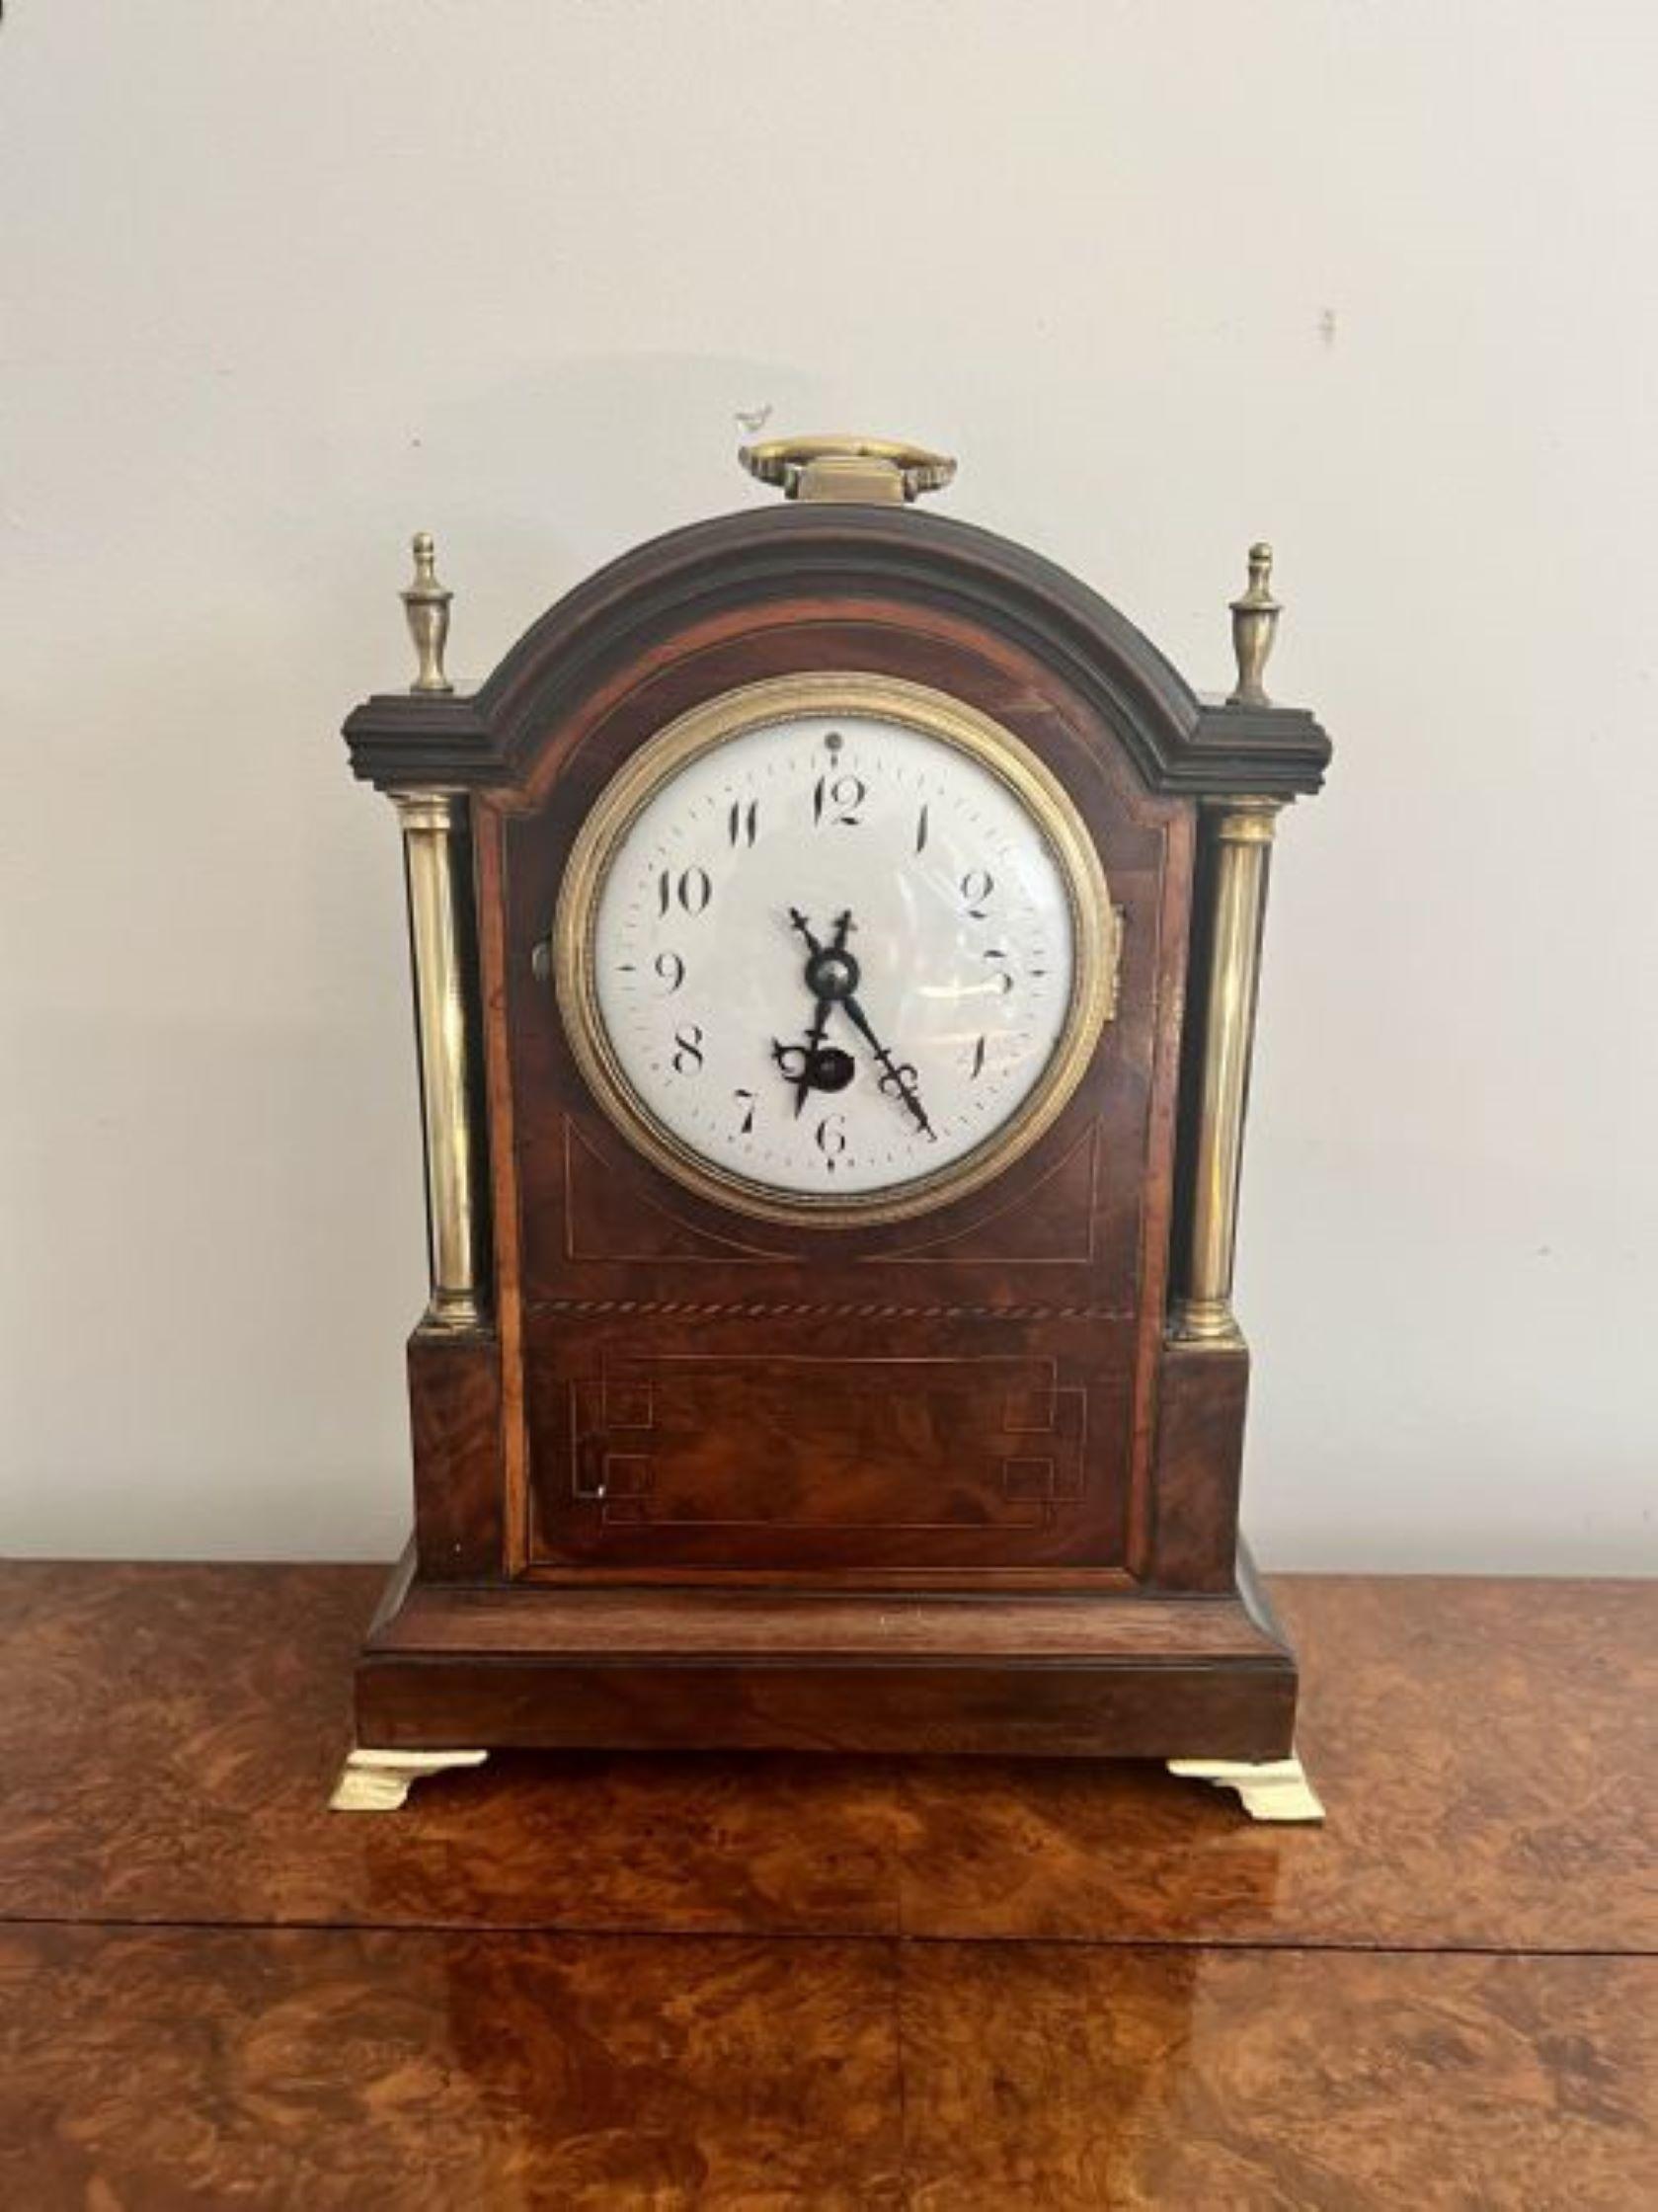 Antique Victorian quality mahogany inlaid bracket clock, having a quality inlaid mahogany case with a brass carrying handle to the top, turned brass columns and finales, white enamel dial with the original hands, standing on brass shaped feet at the